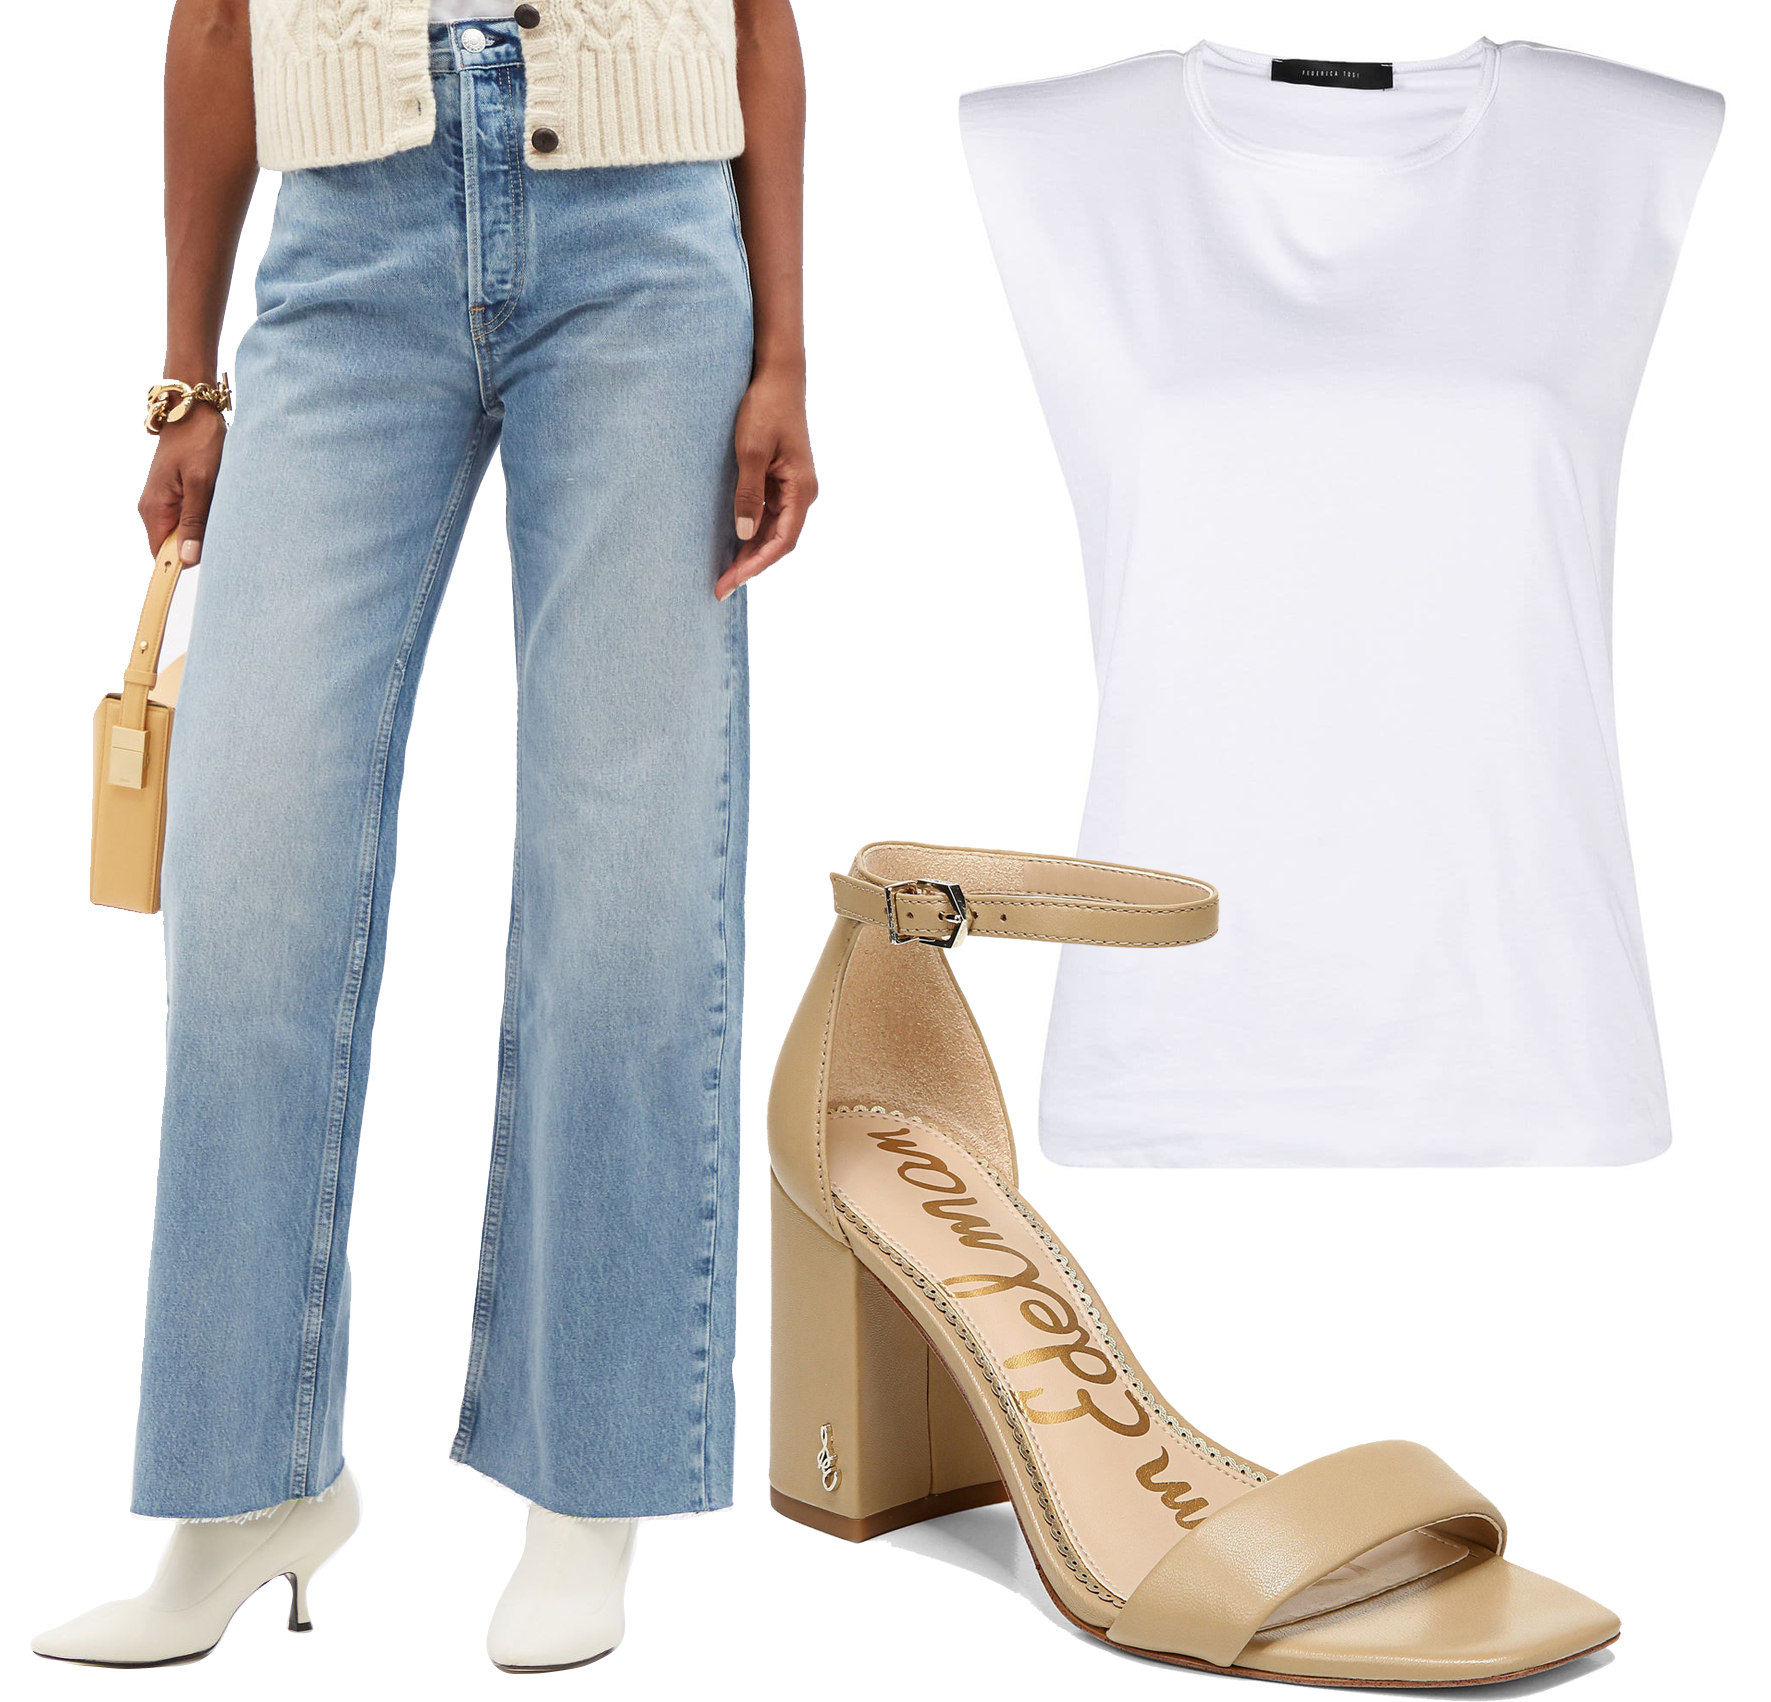 Retro chic meets modern flair: Re/Done 70s ultra high rise wide-leg jeans with Sam Edelman ankle strap sandals and a Federica Tosi vest boasting statement shoulder pads for a bold, fashionable statement